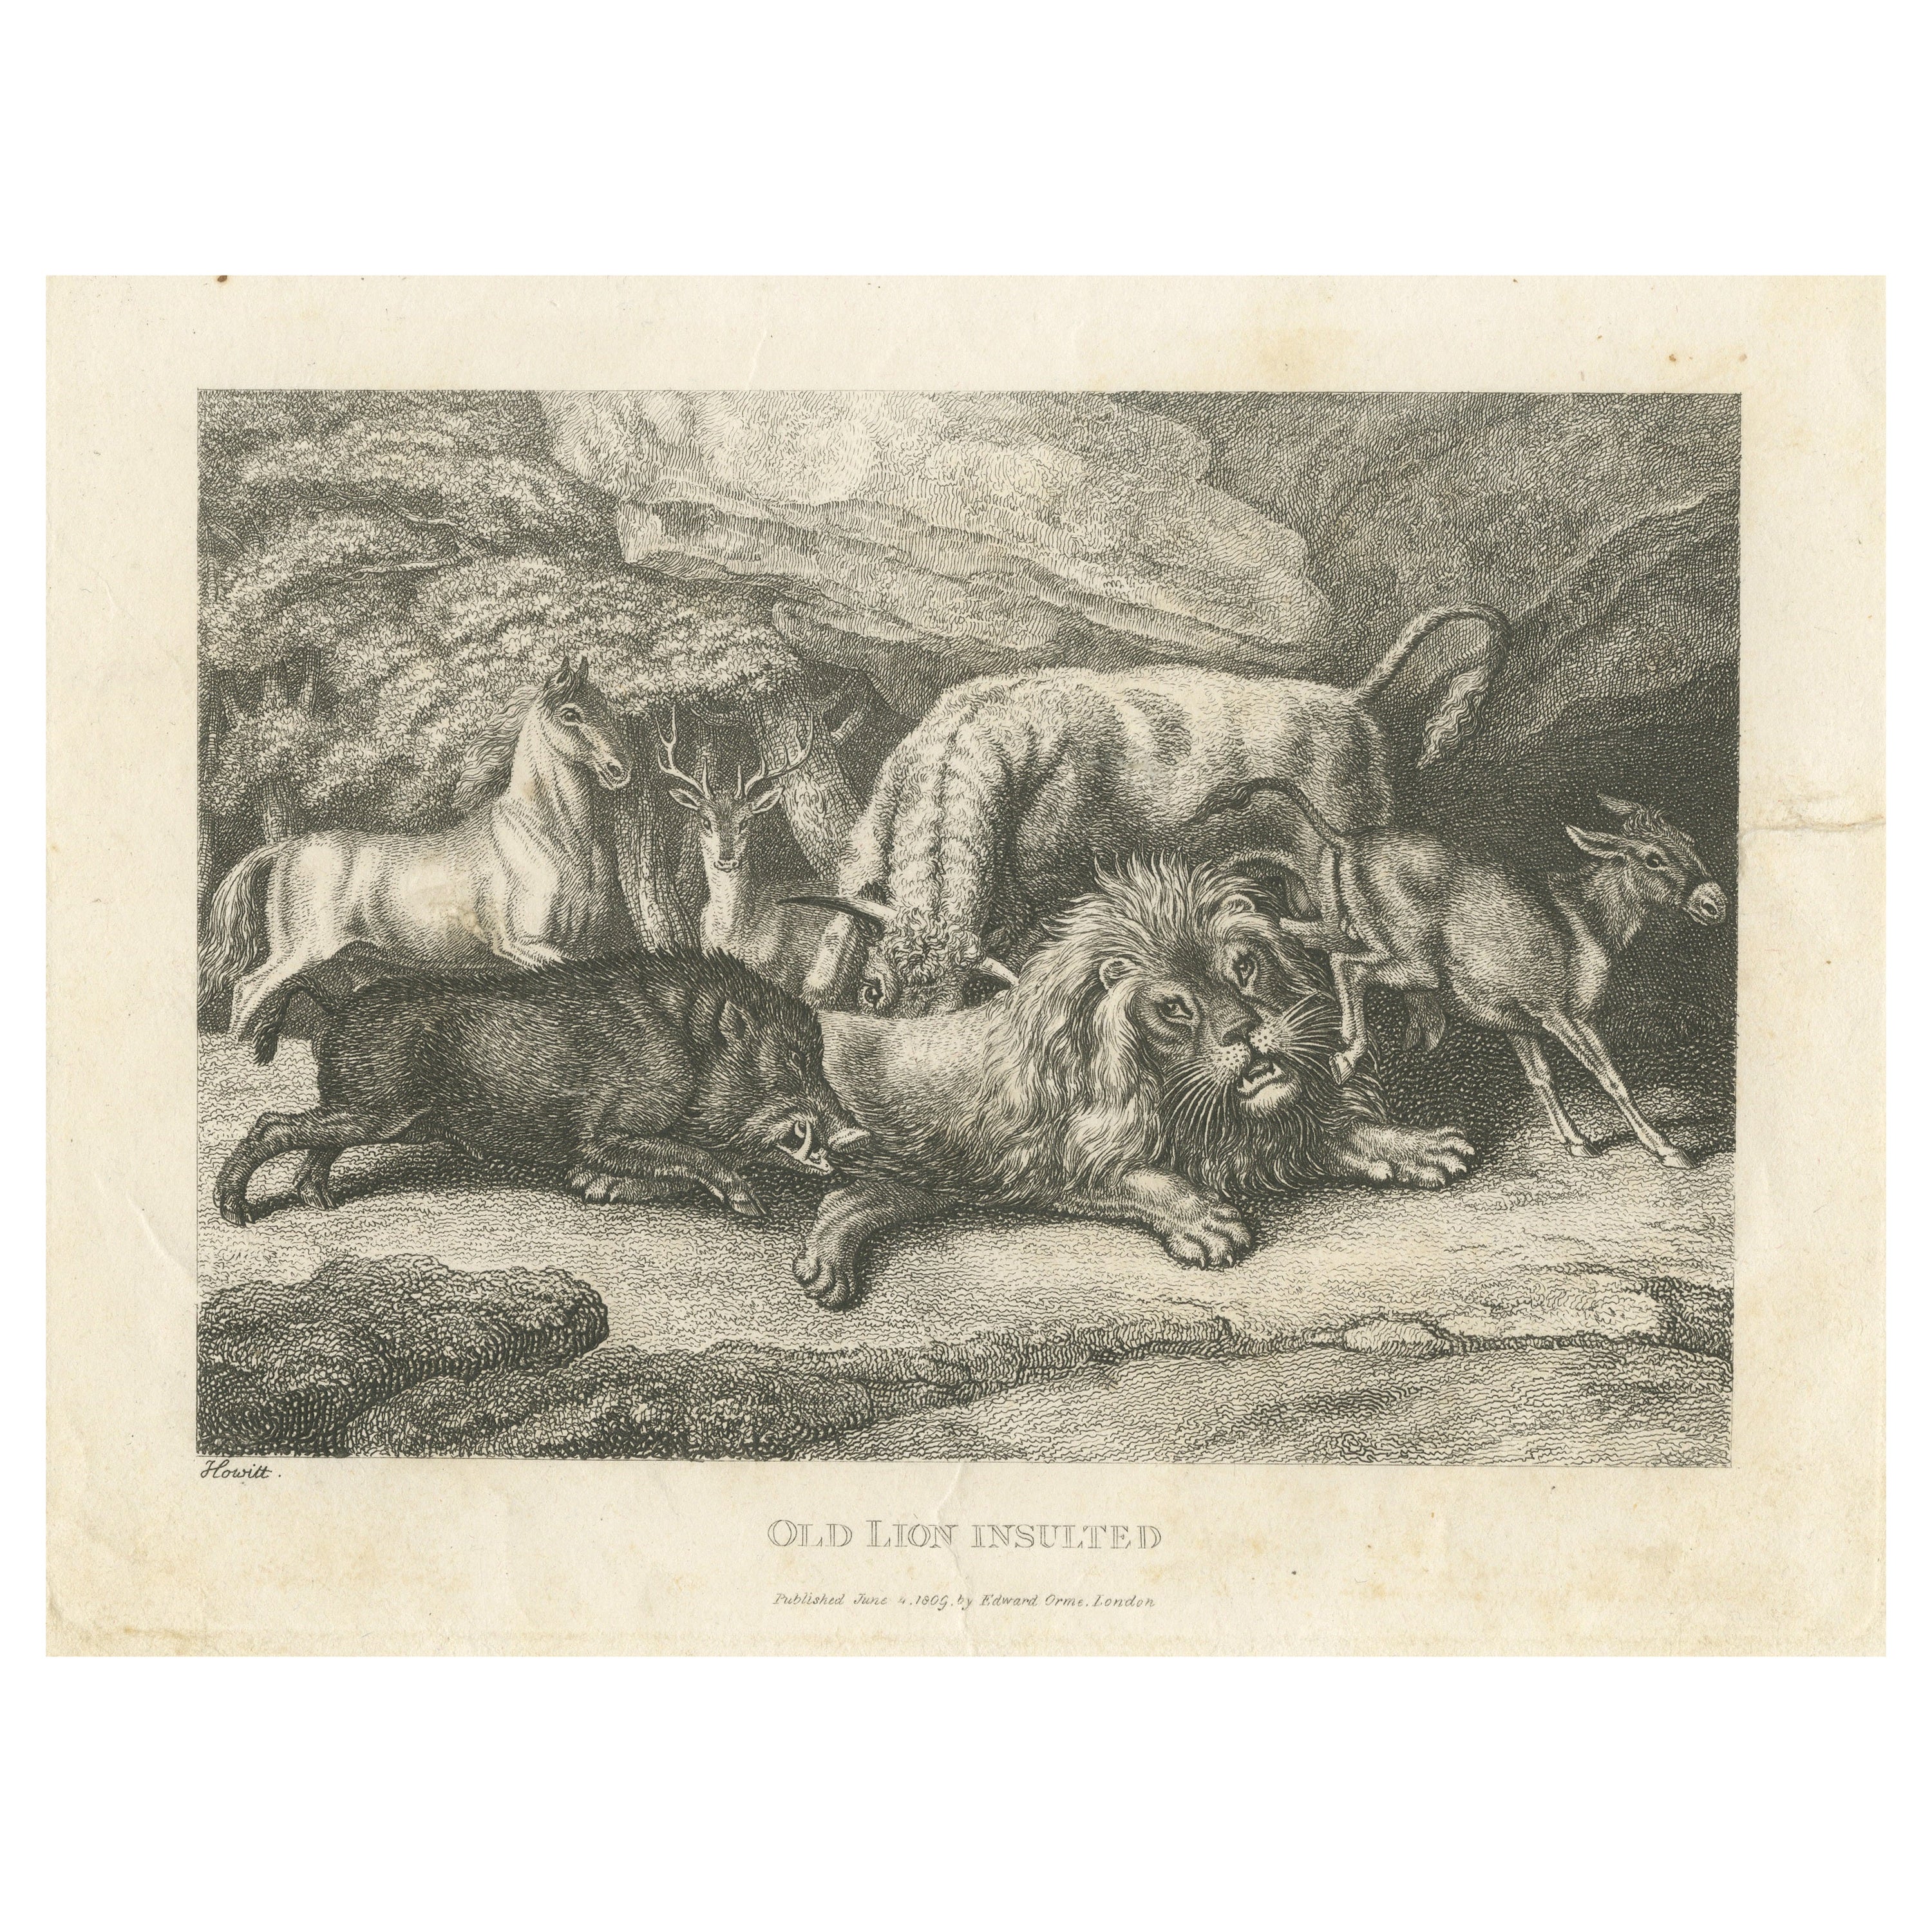 Original Antique Print of Old Lion Insulted For Sale